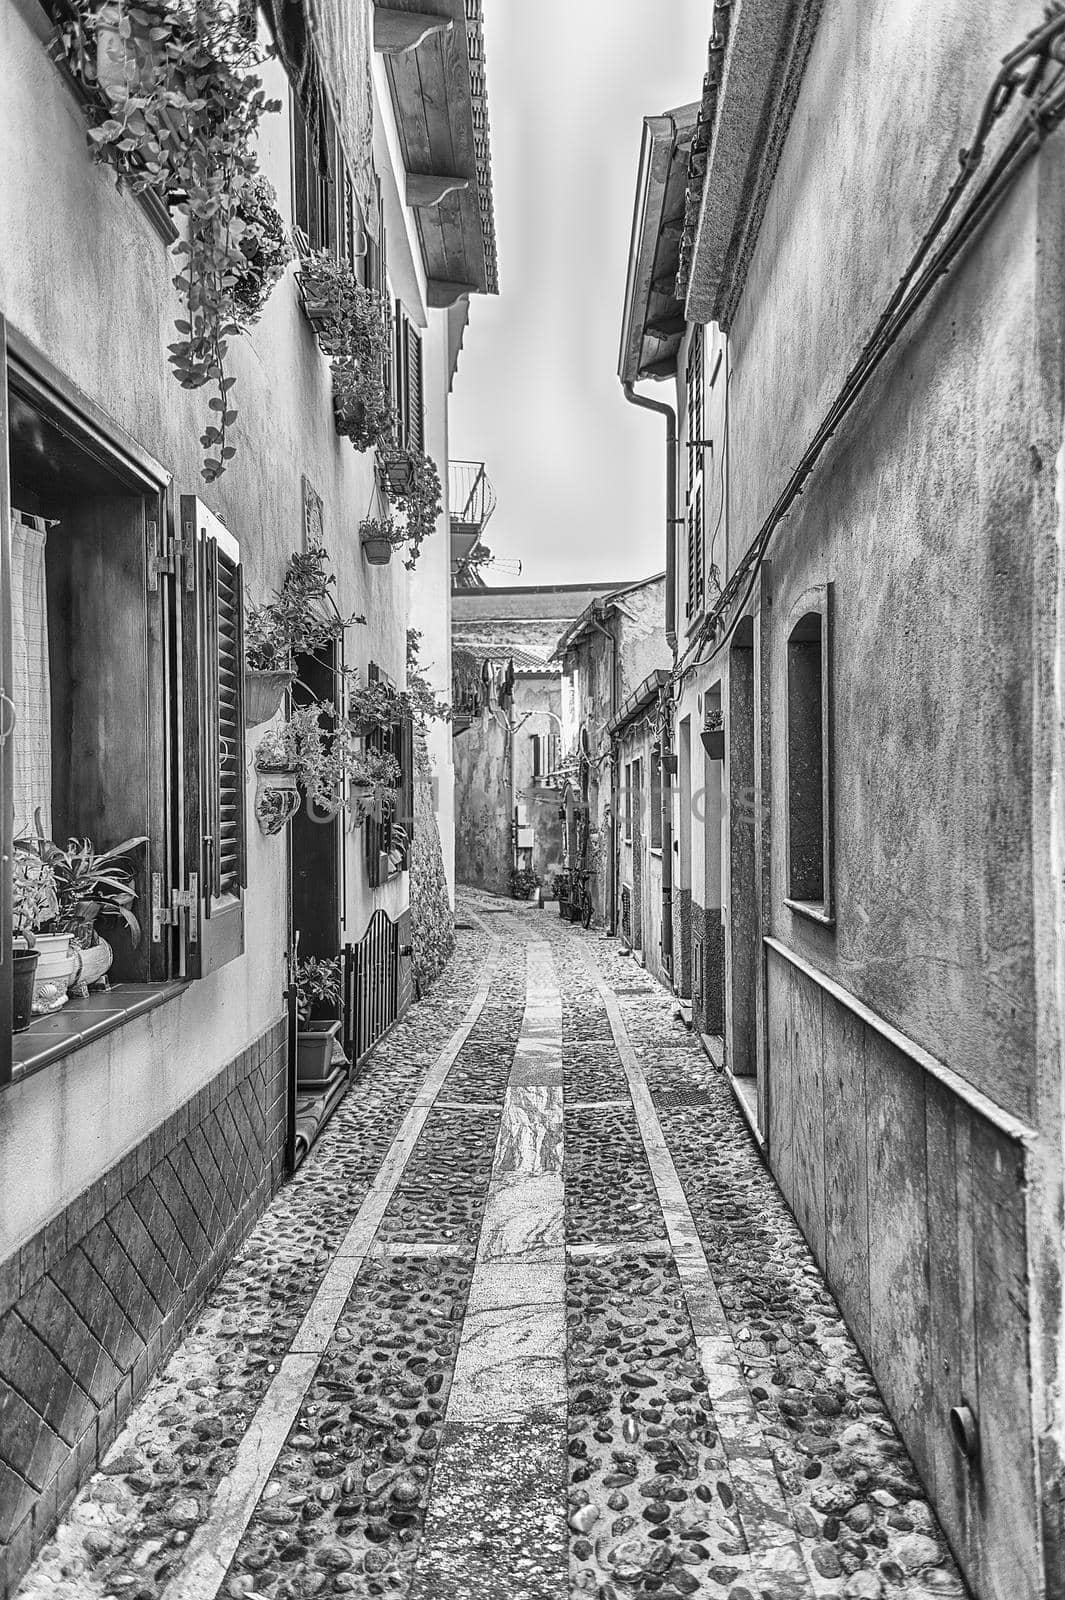 Picturesque streets and alleys in the seaside village, Scilla, Italy by marcorubino